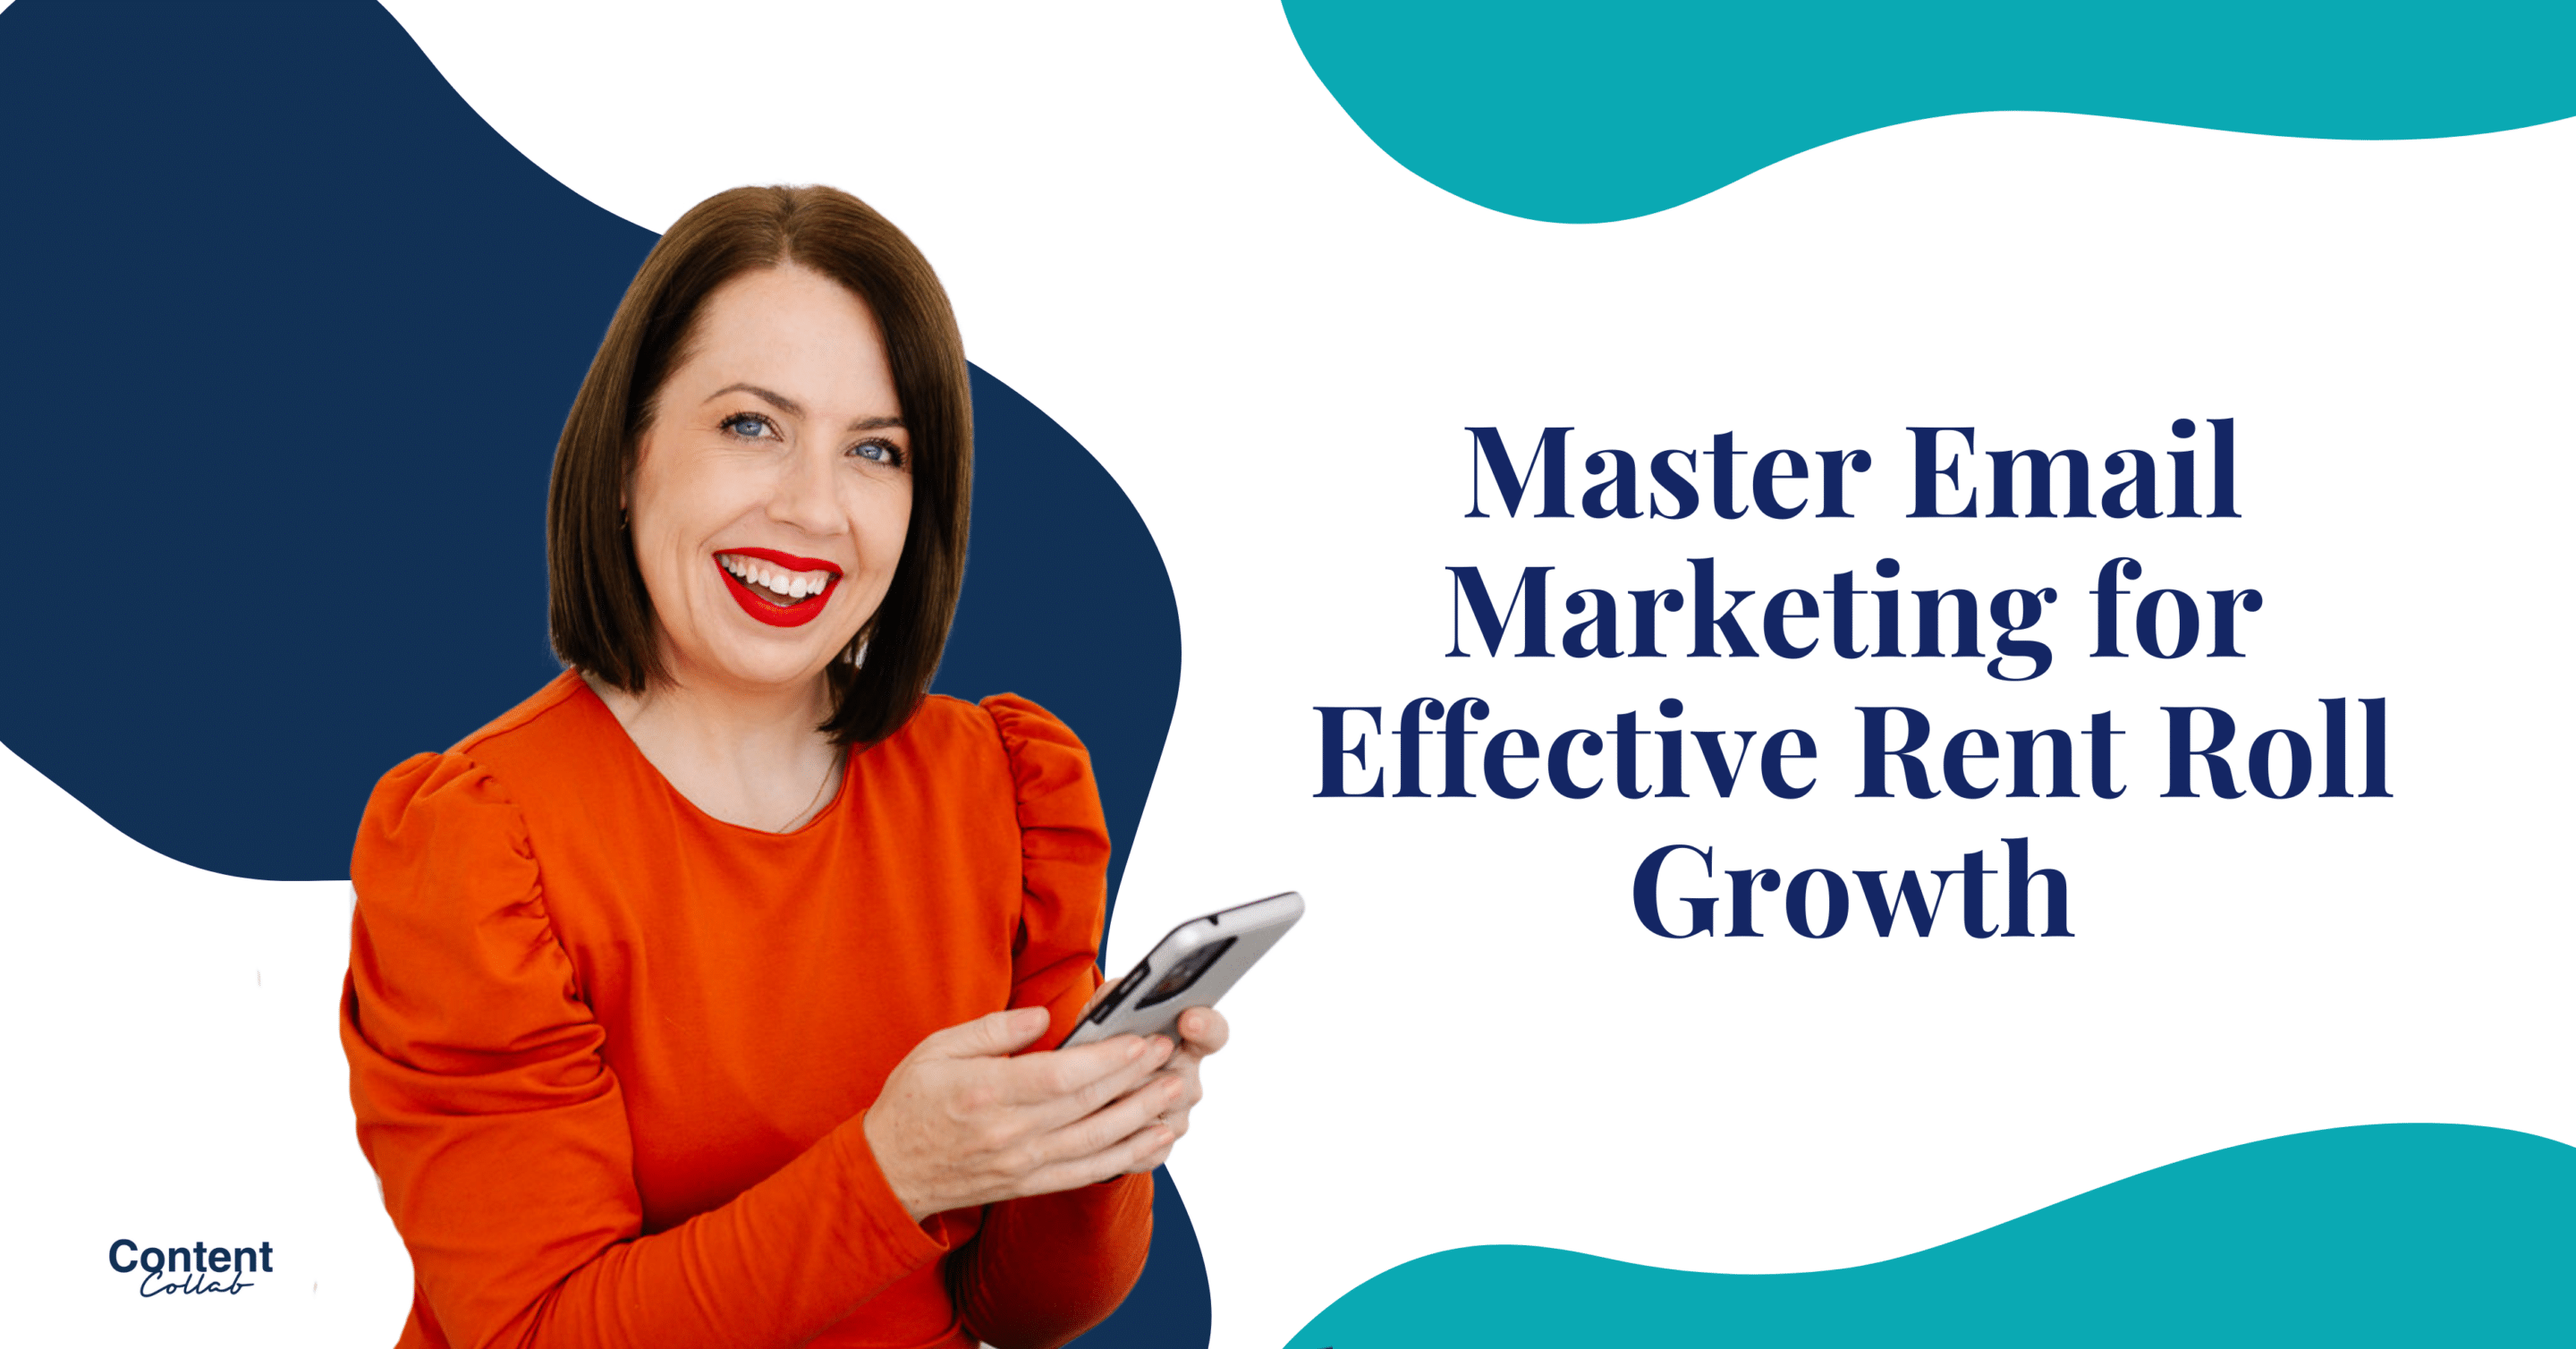 Master Email Marketing for Effective Rent Roll Growth